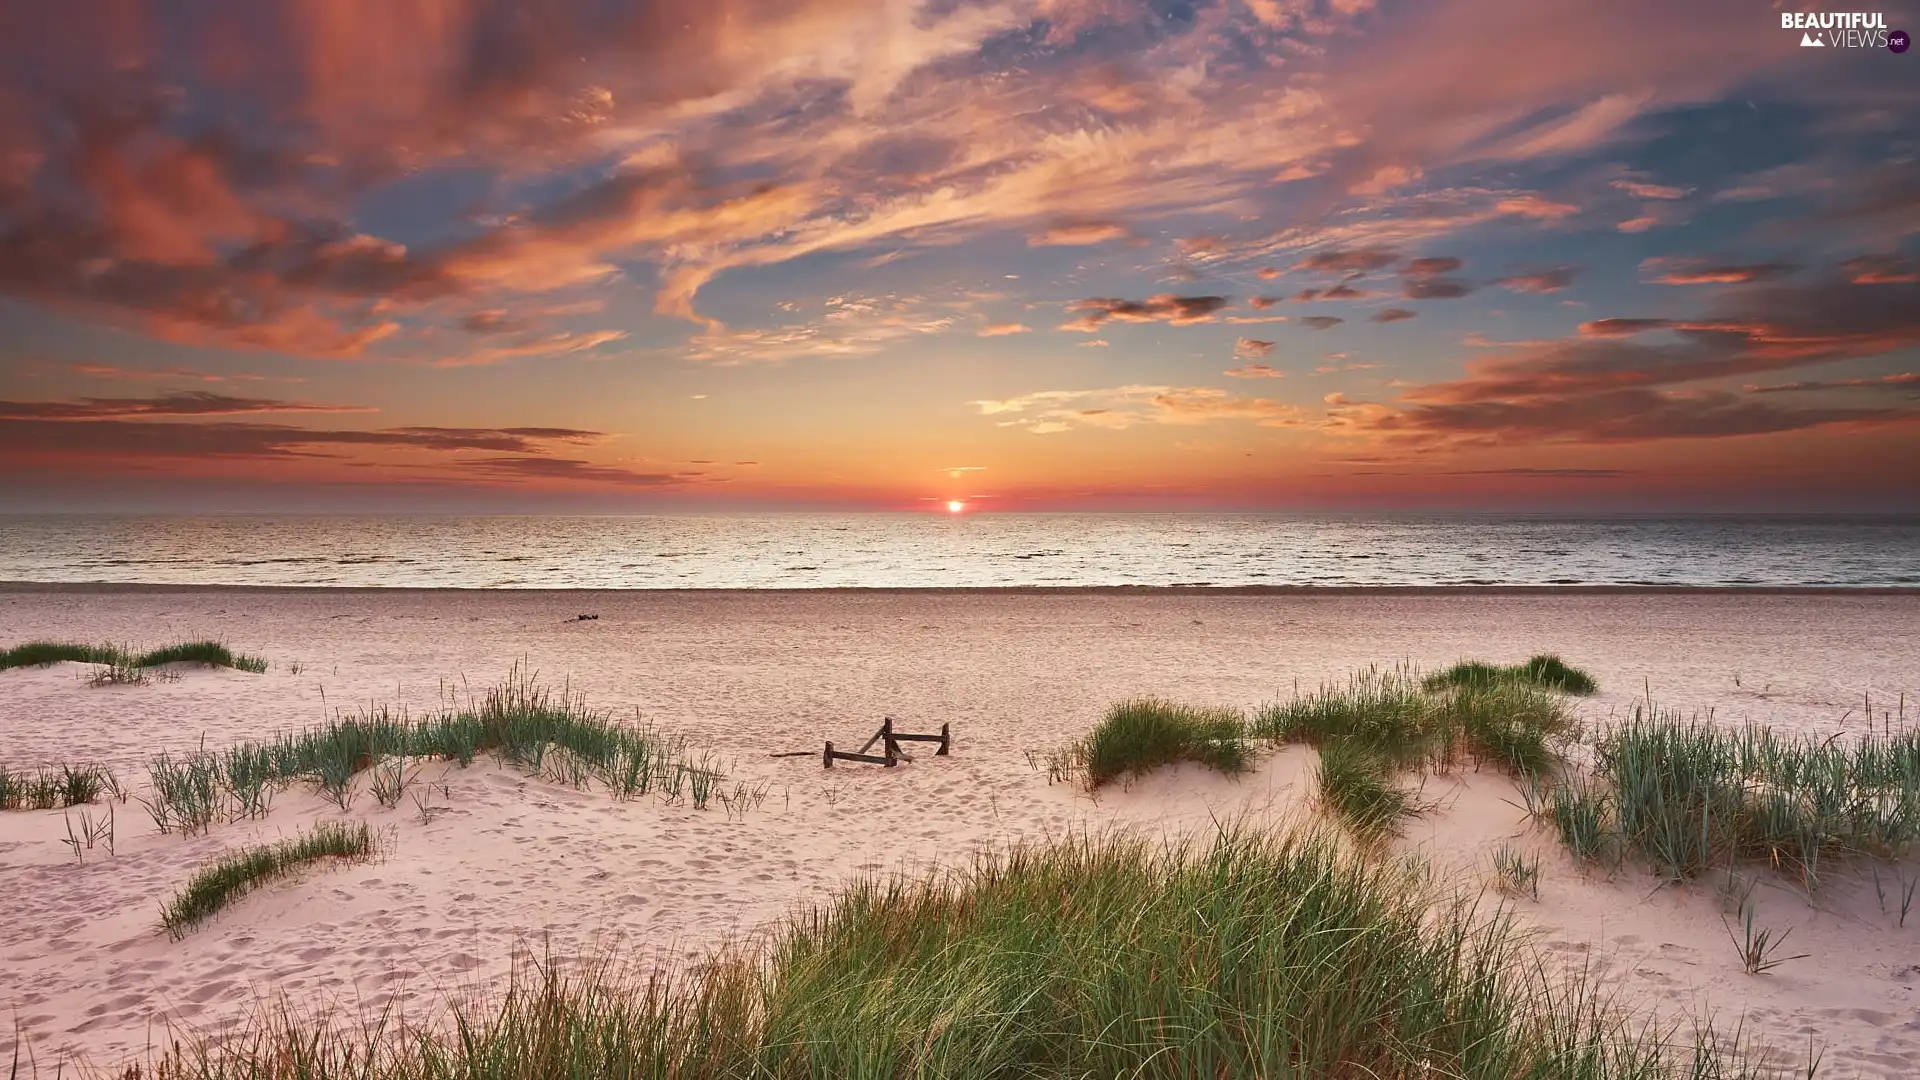 Baltic Sea, Beaches, clouds, Poland, Great Sunsets, grass